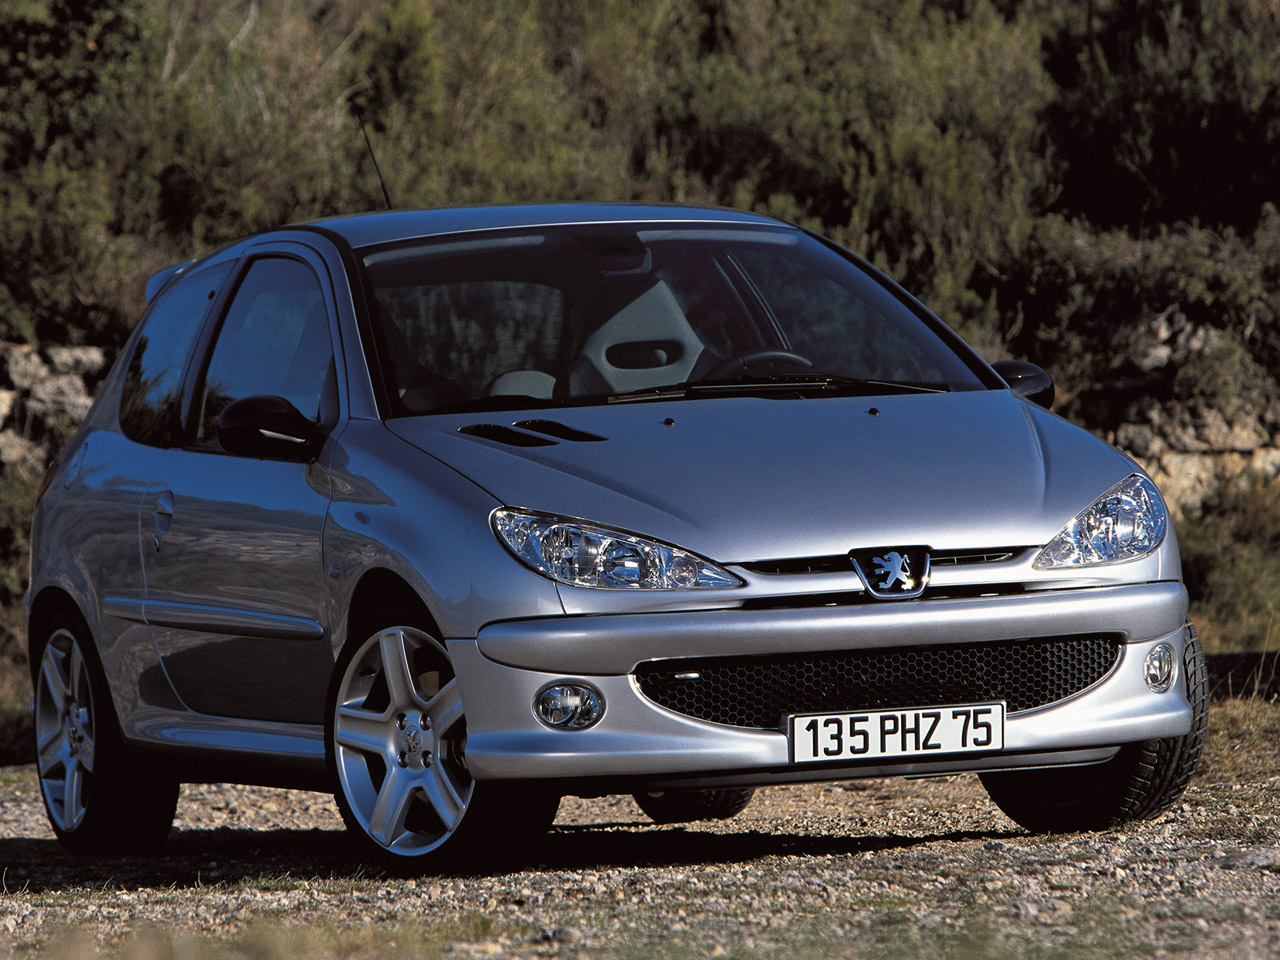 Peugeot 206 RCpicture 5 , reviews, news, specs, buy car